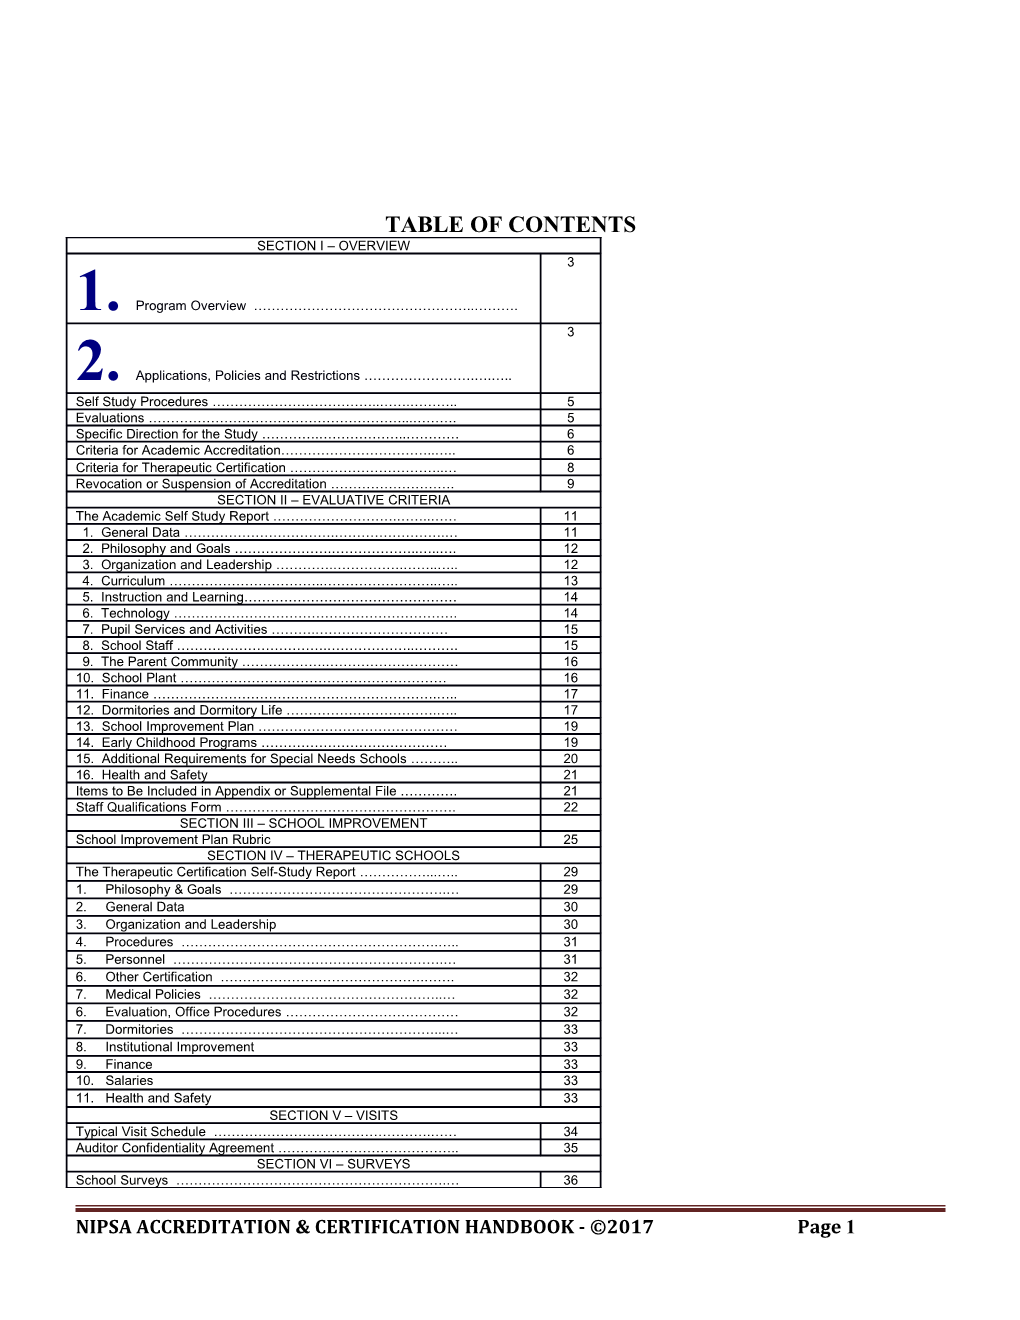 Table of Contents s12